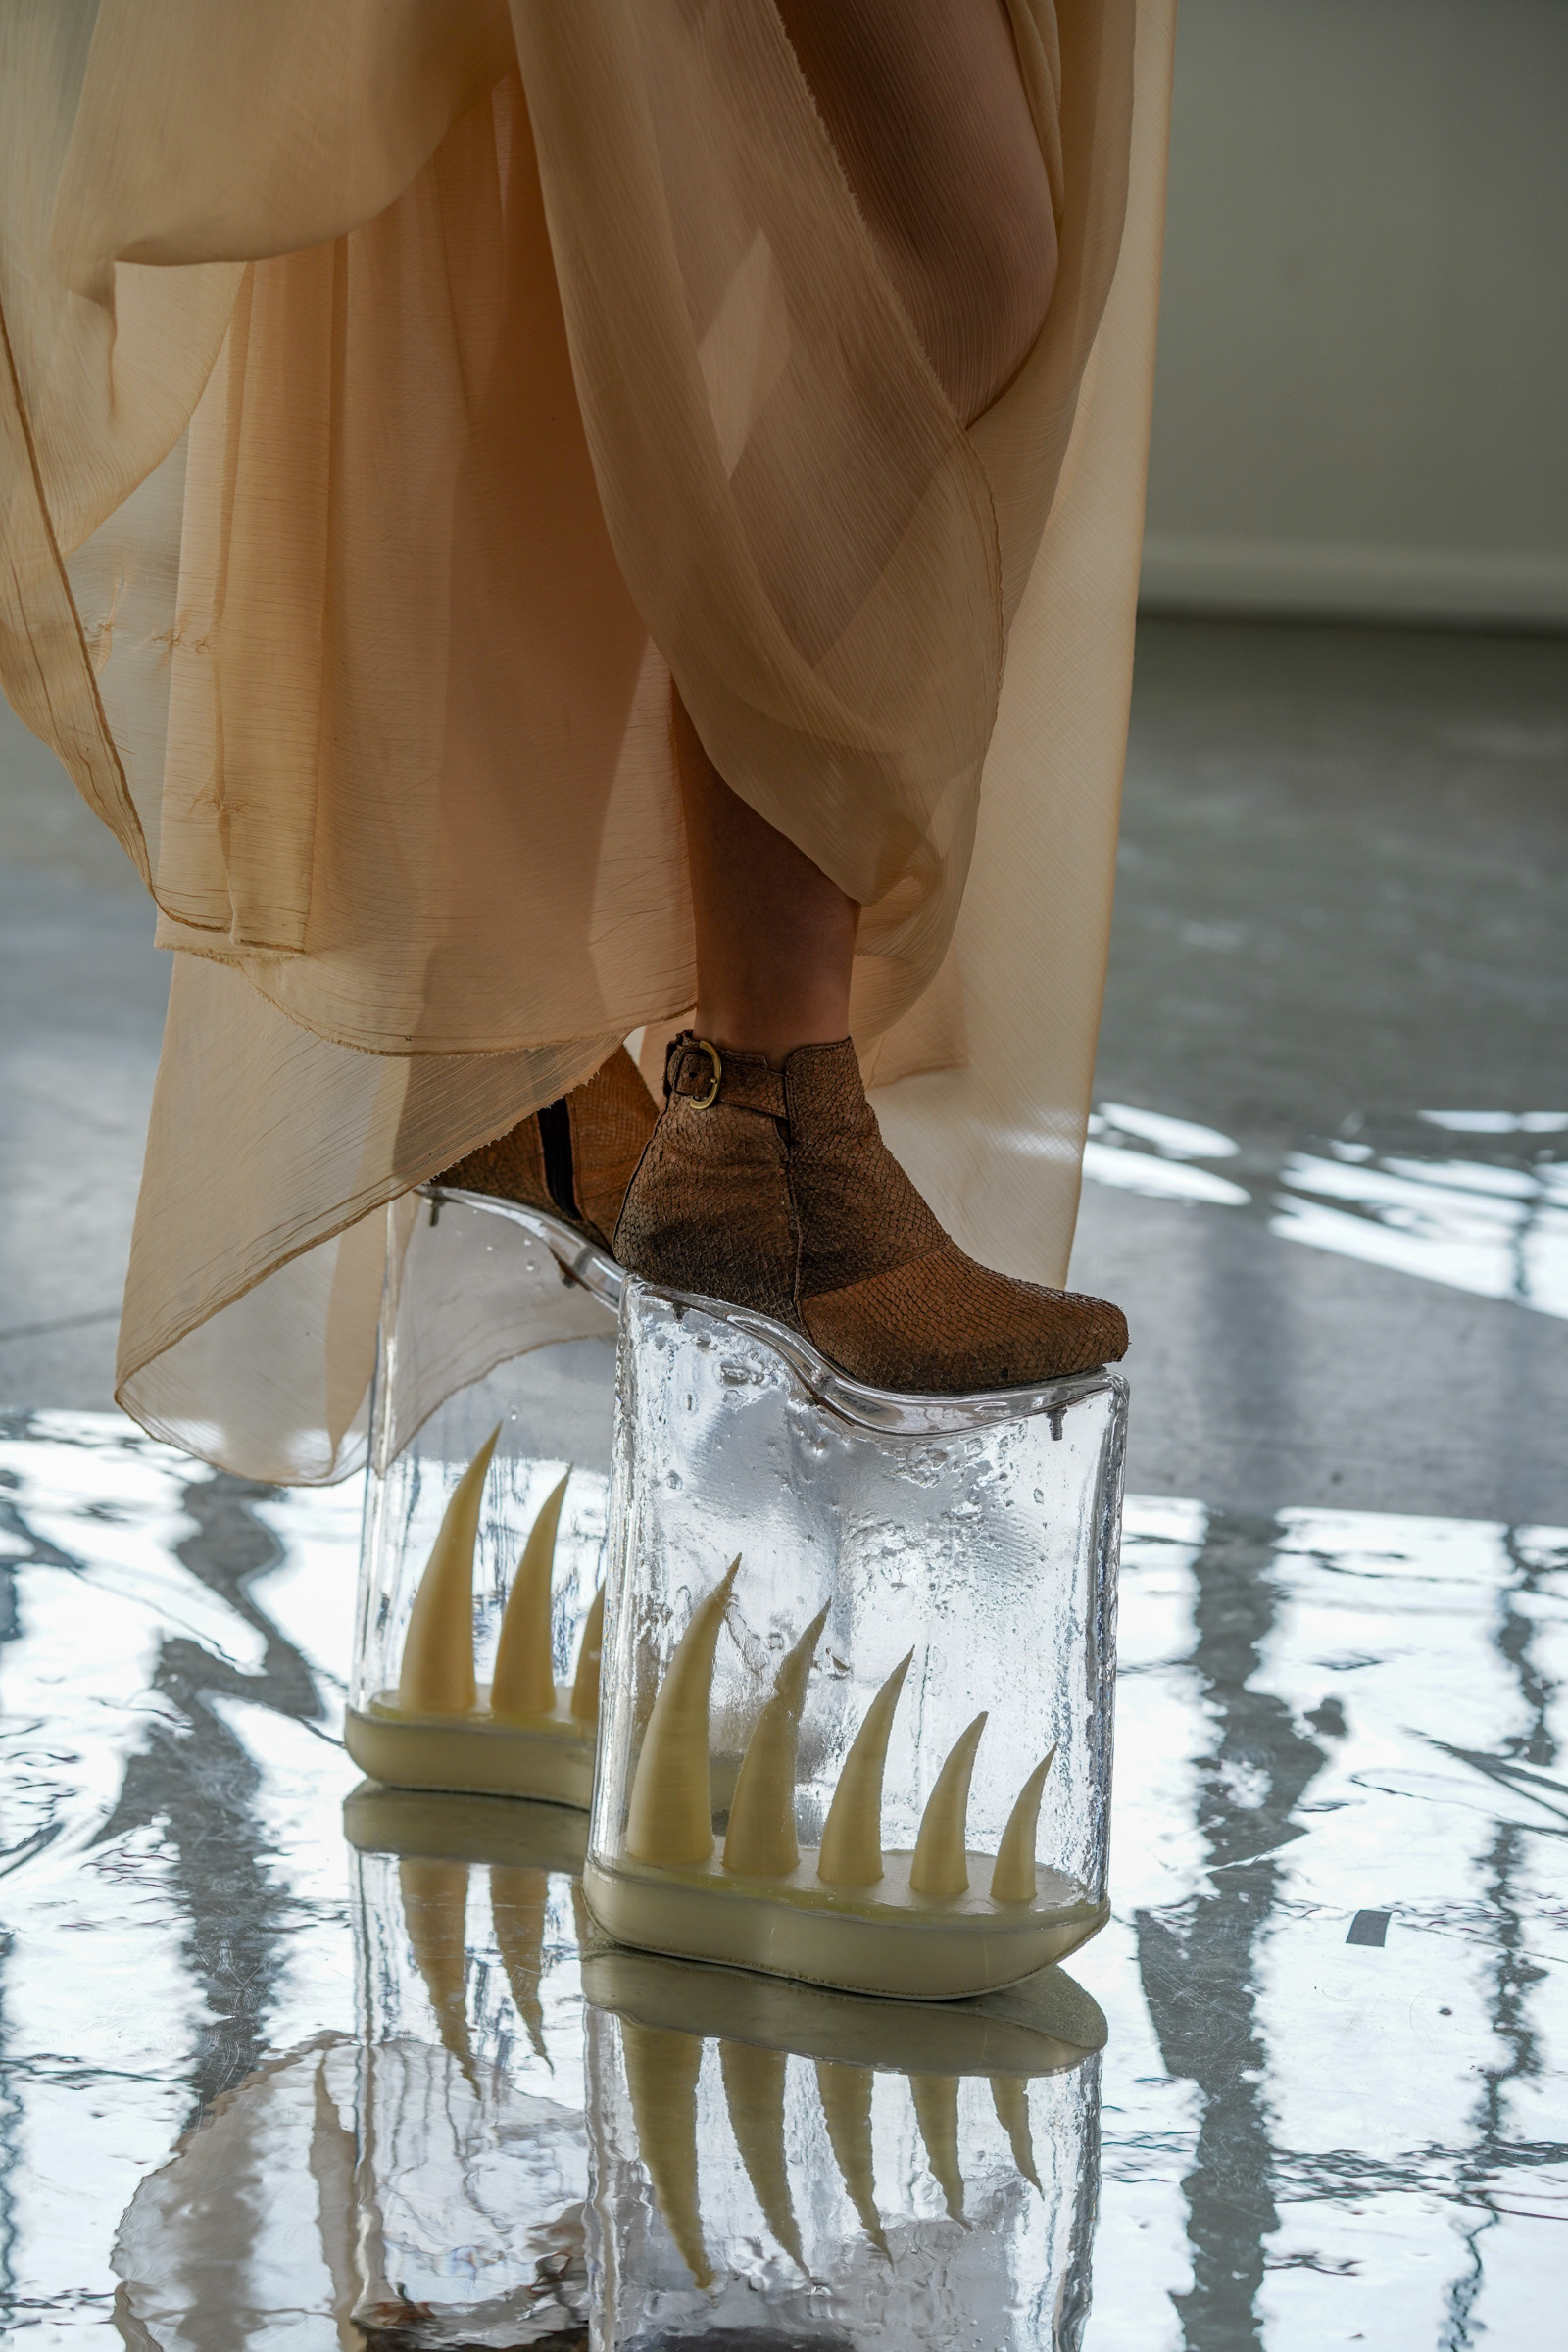 New York Fashion Week, Flying Solo Show, Canoa Studios, glass shoes, glass heels, cinderella shoes, glass art, sculptural shoes